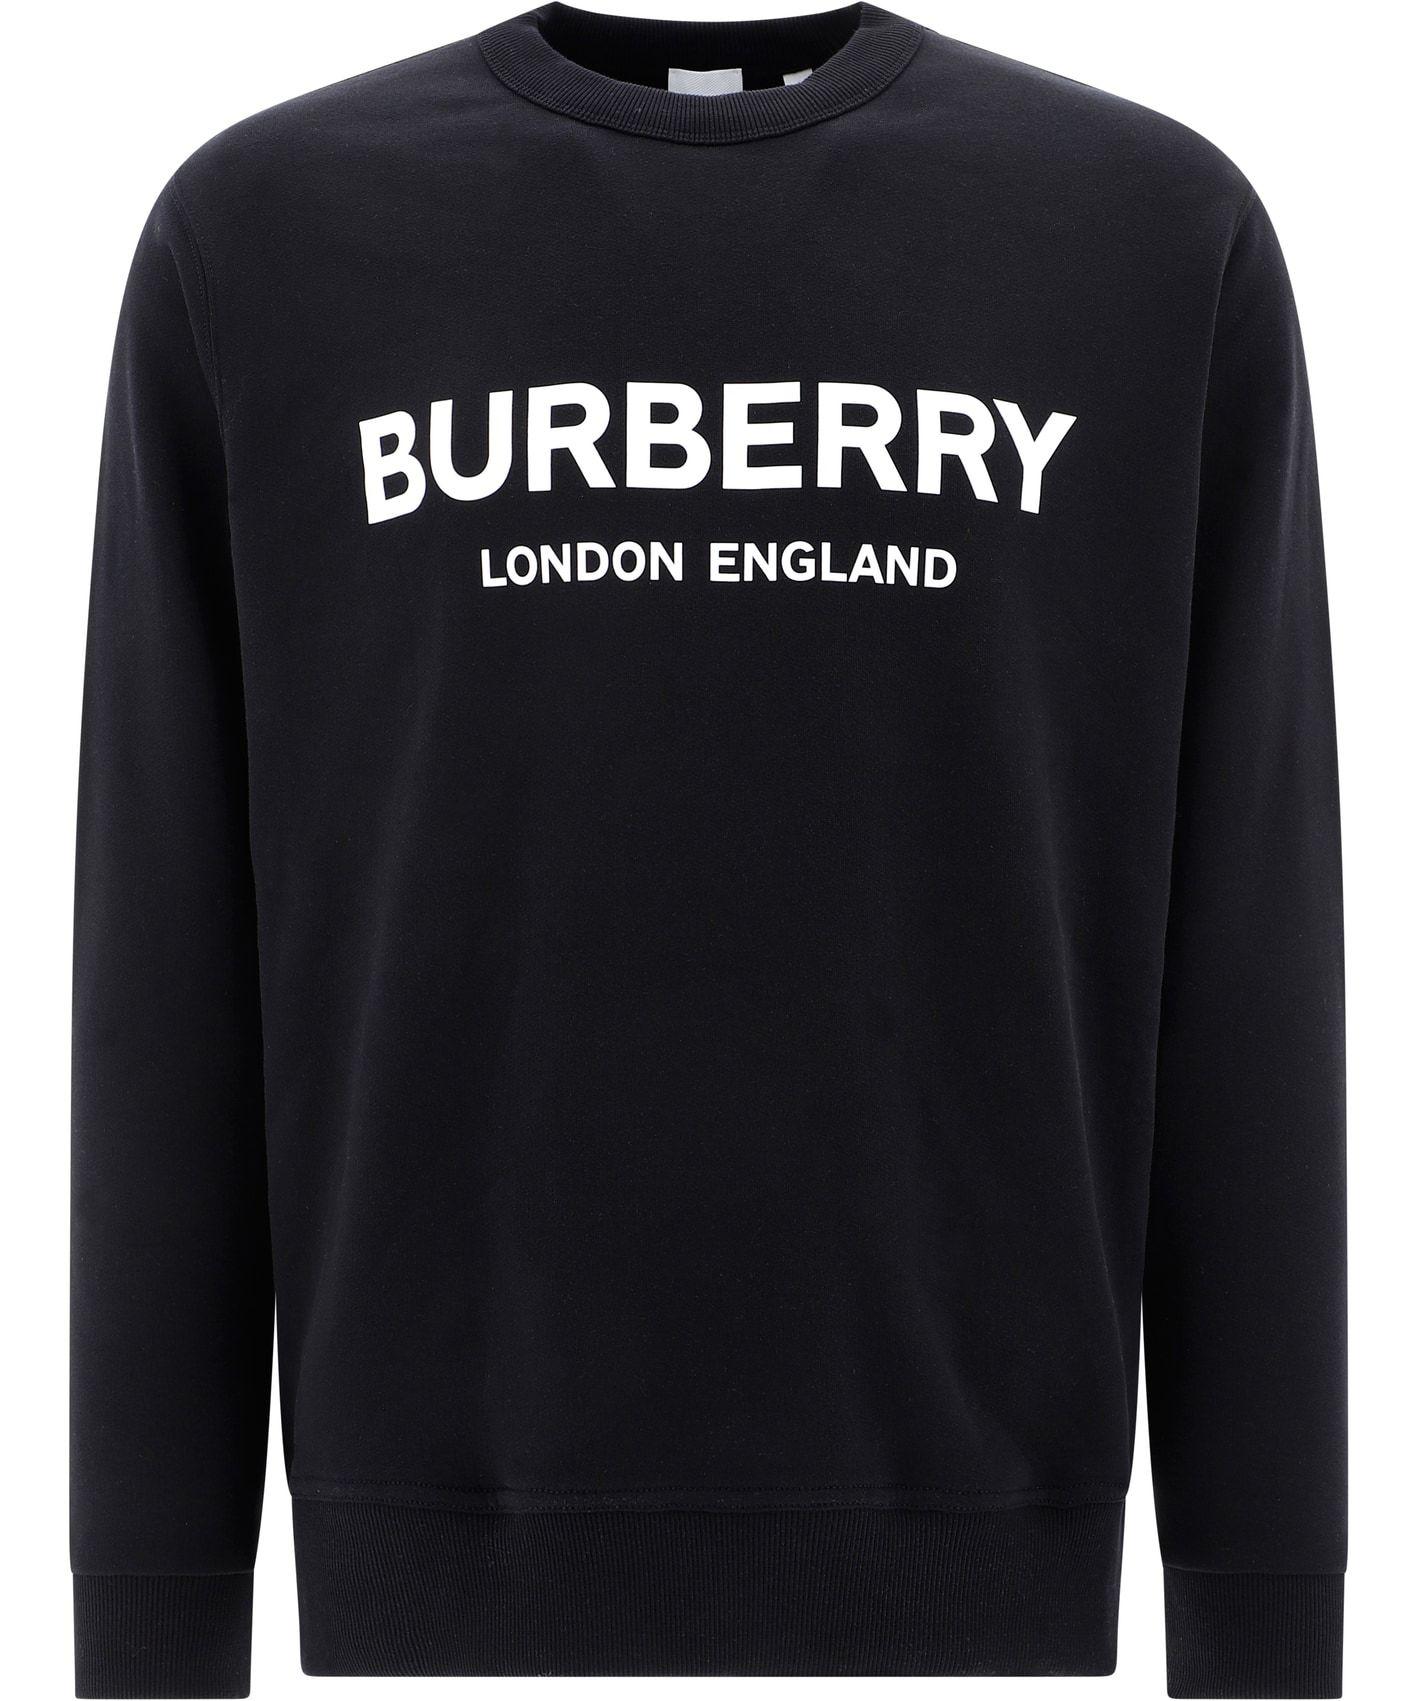 Burberry Cotton Logo Print Sweater in Black for Men - Lyst